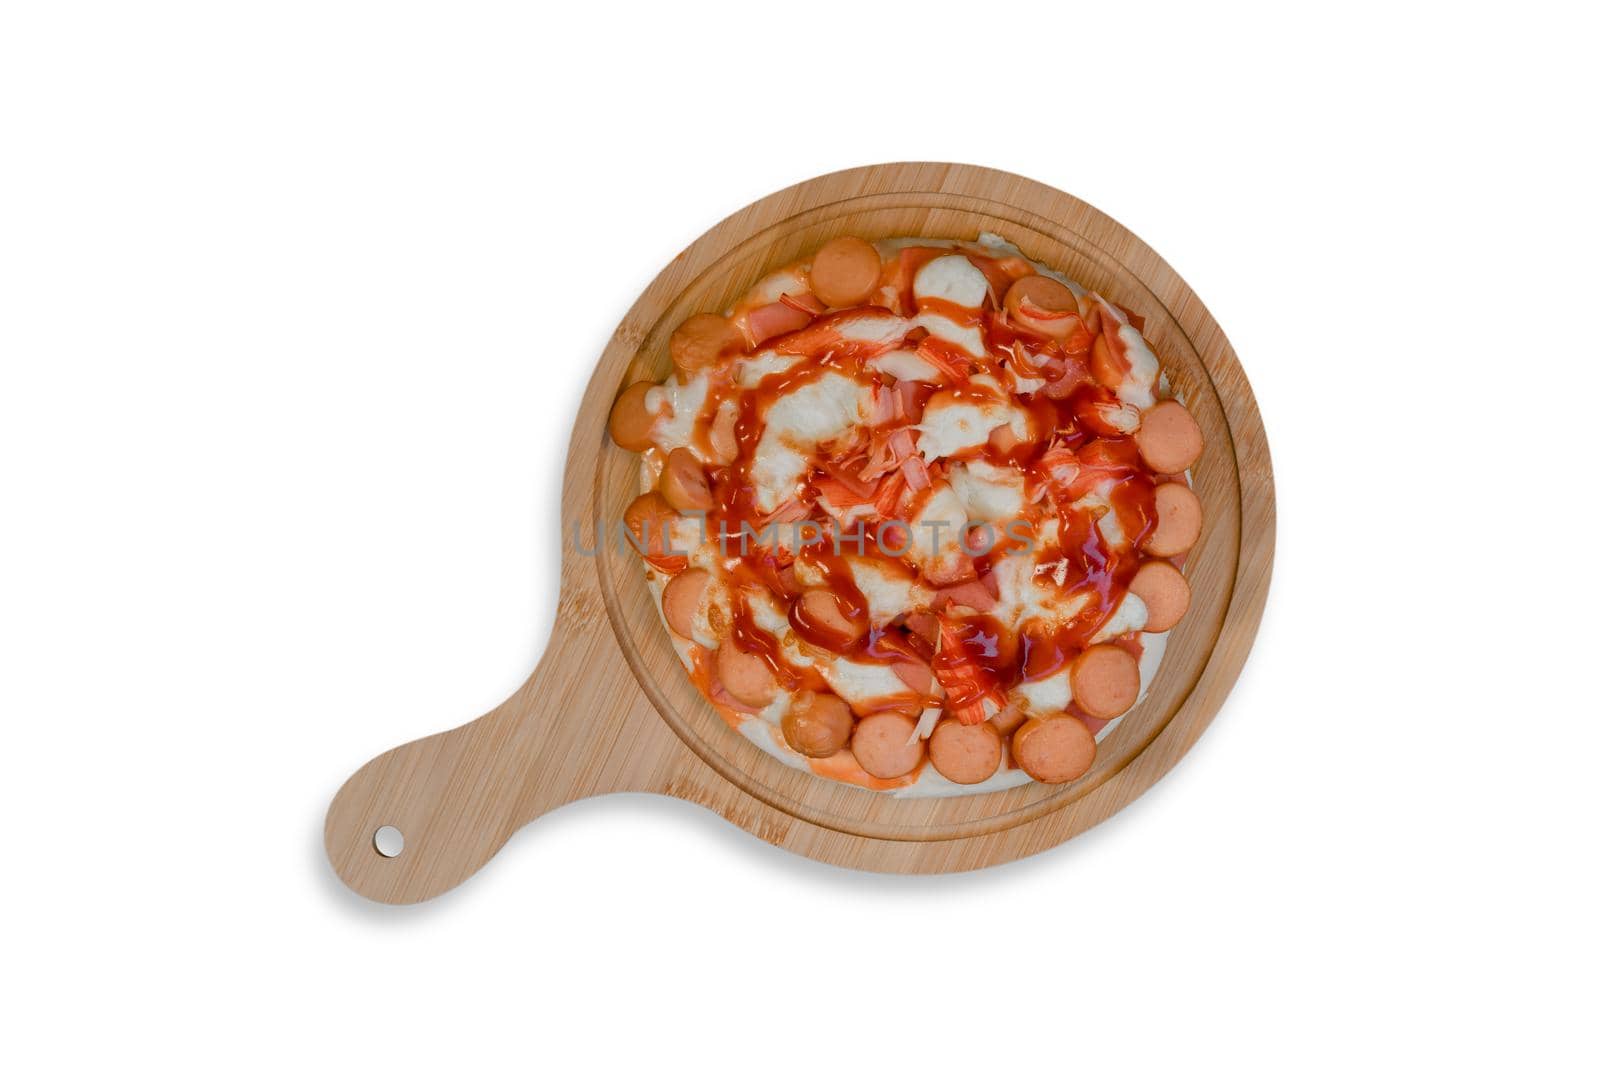 Top view of pizza on a wooden tray on a white background